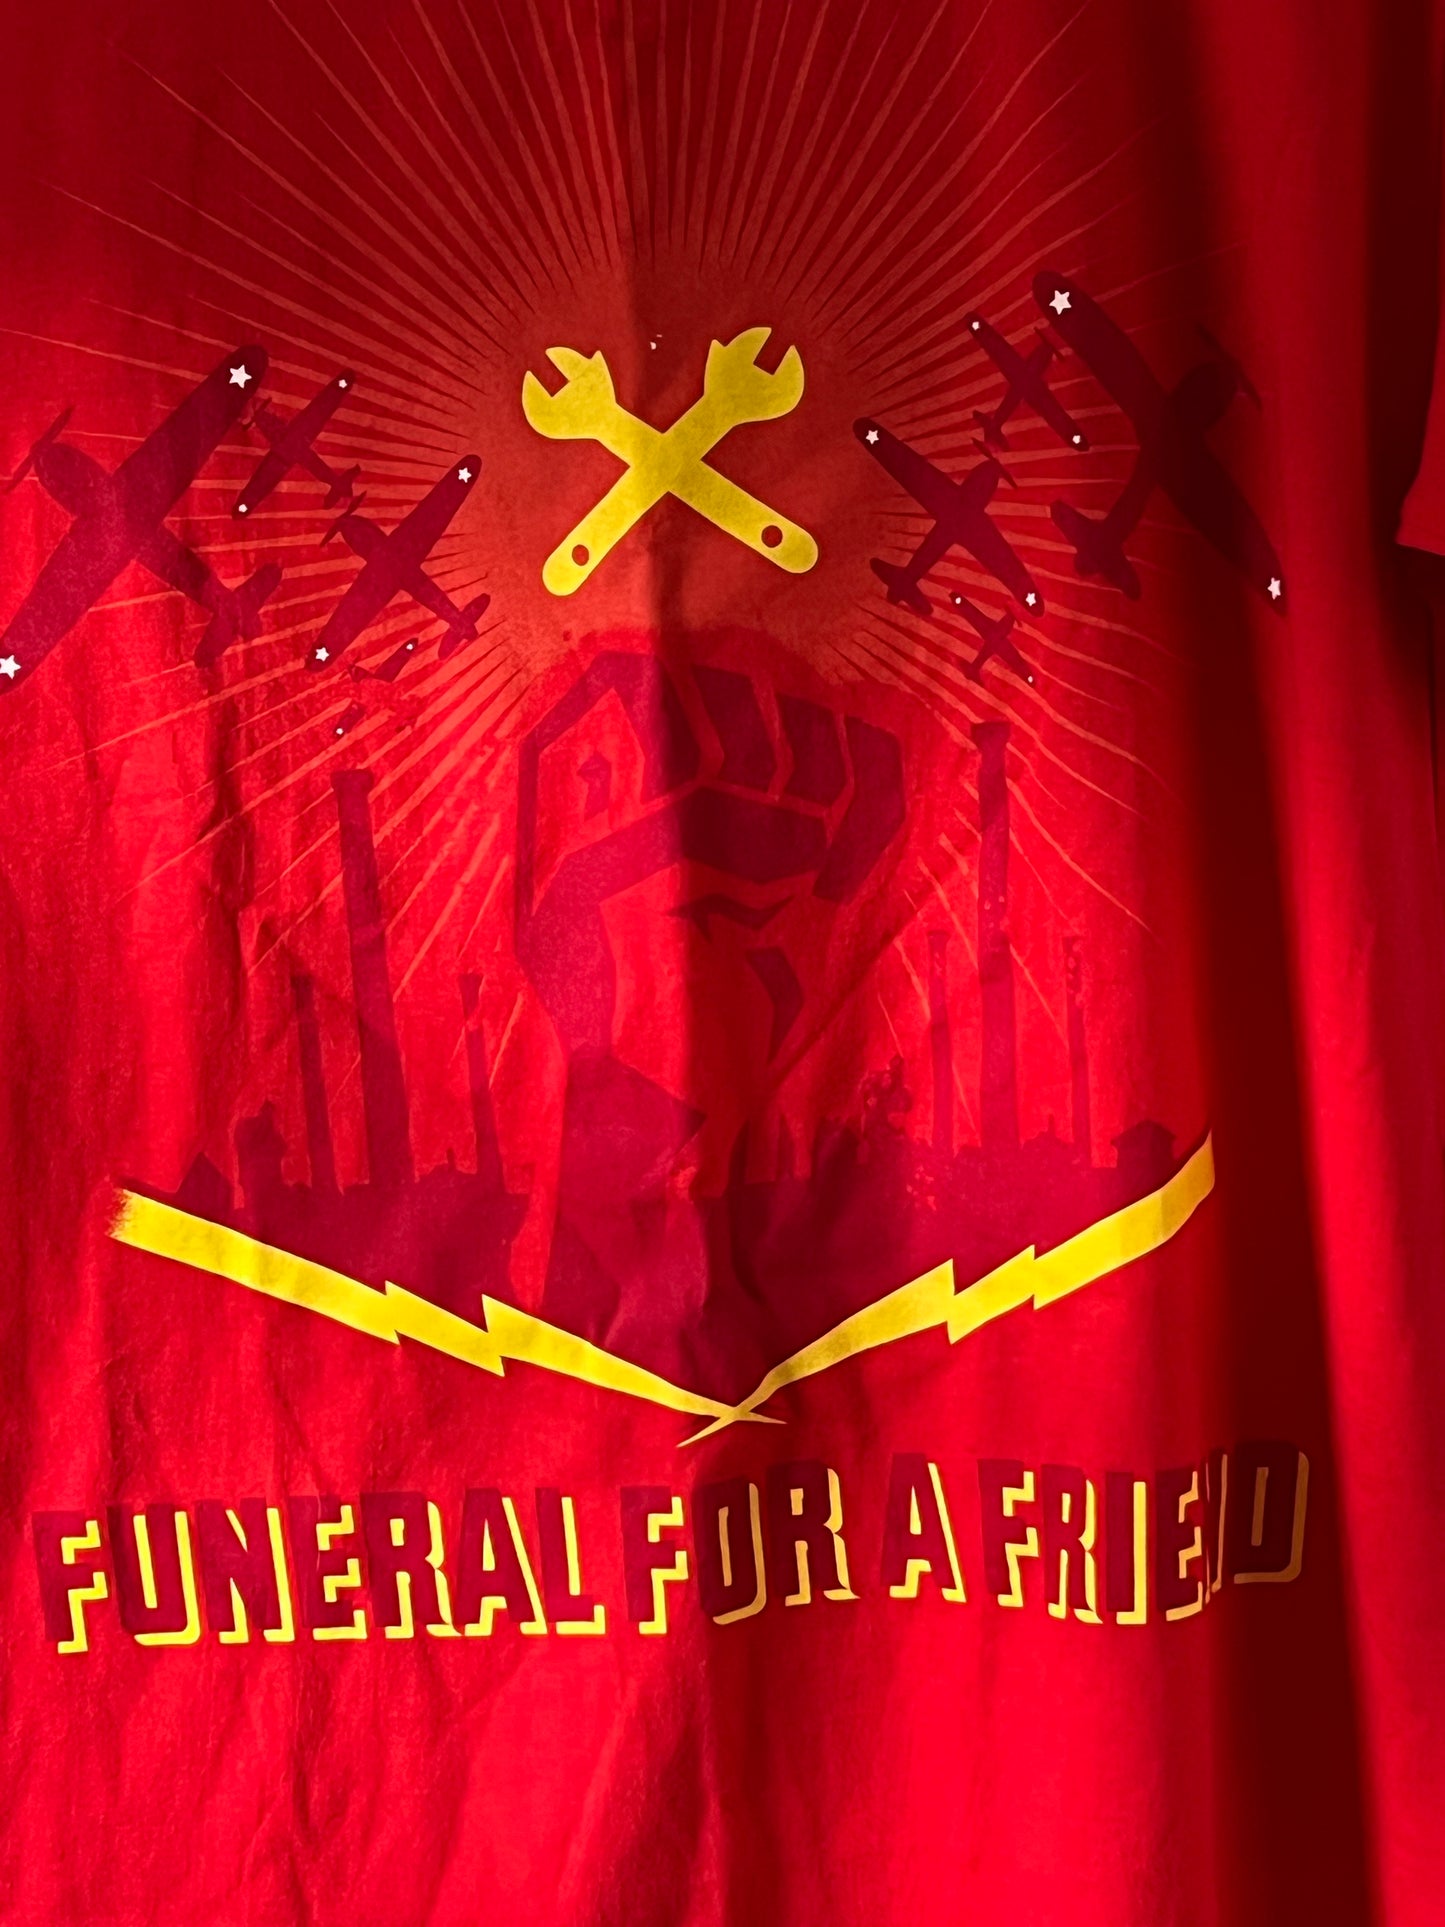 Funeral for a Friend red rock band t shirt sz M